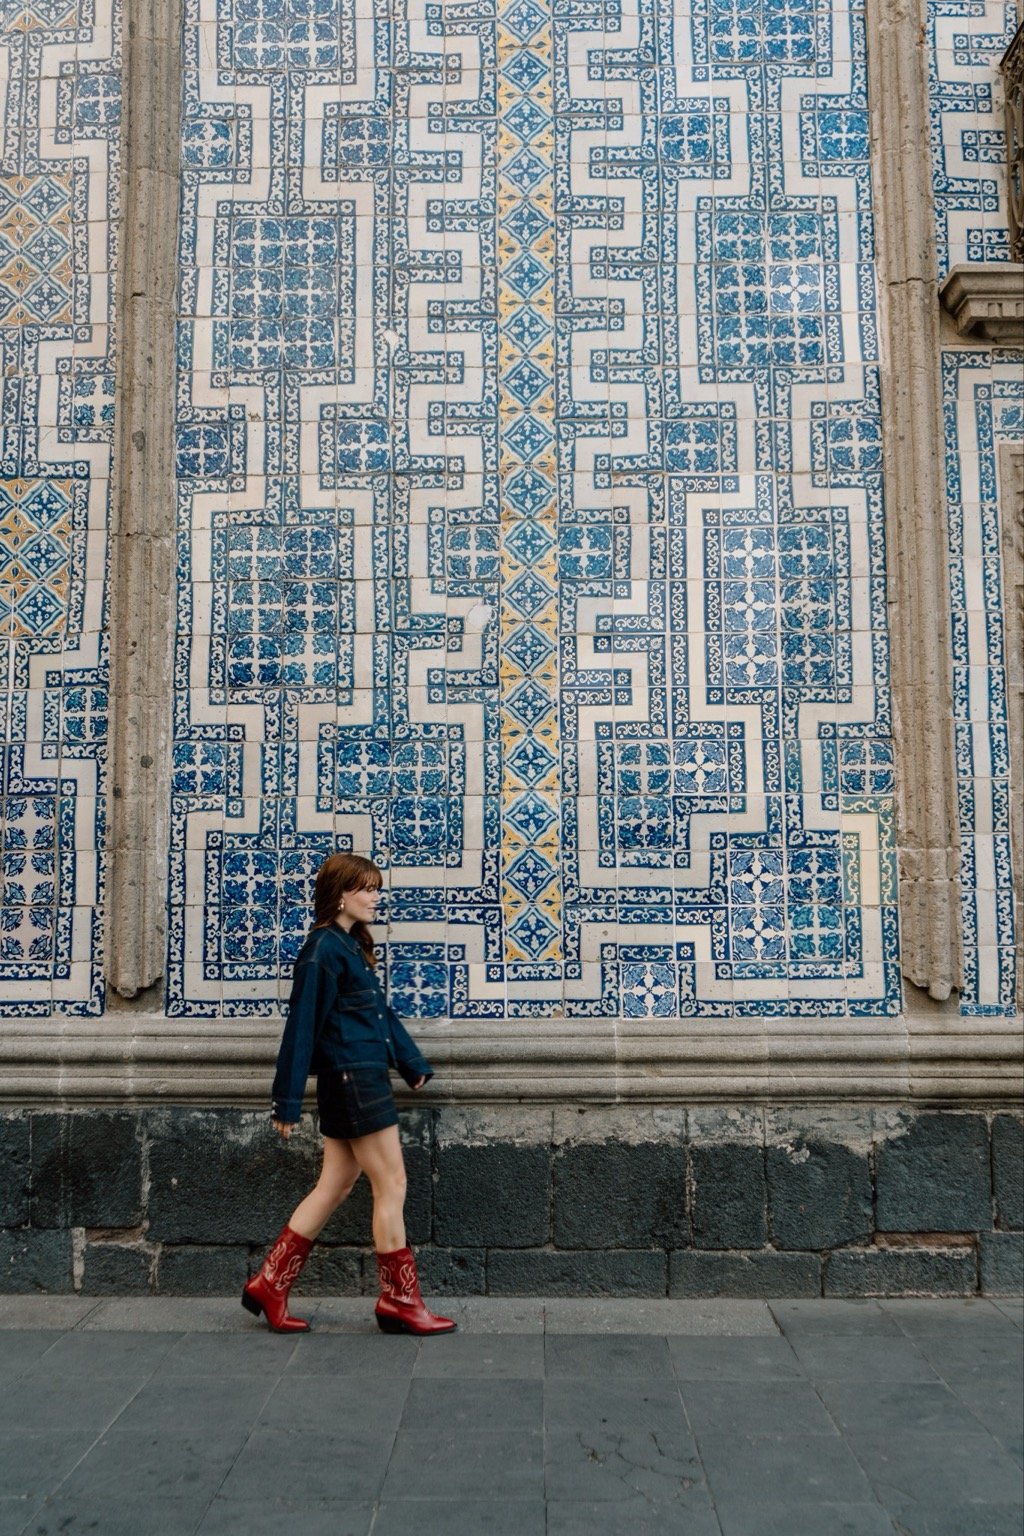 The House of Tiles in Centro CDMX